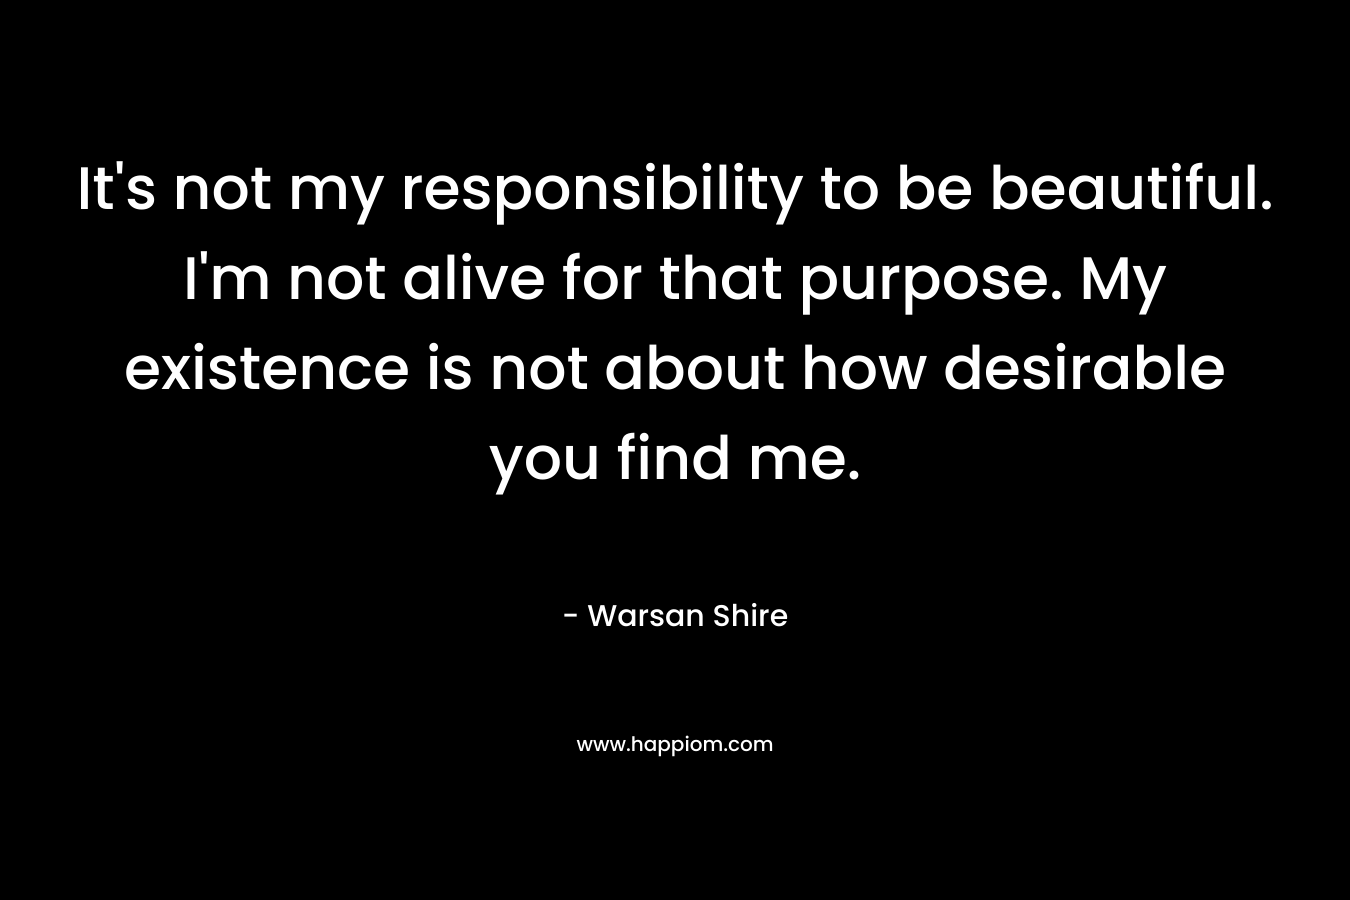 It's not my responsibility to be beautiful. I'm not alive for that purpose. My existence is not about how desirable you find me.